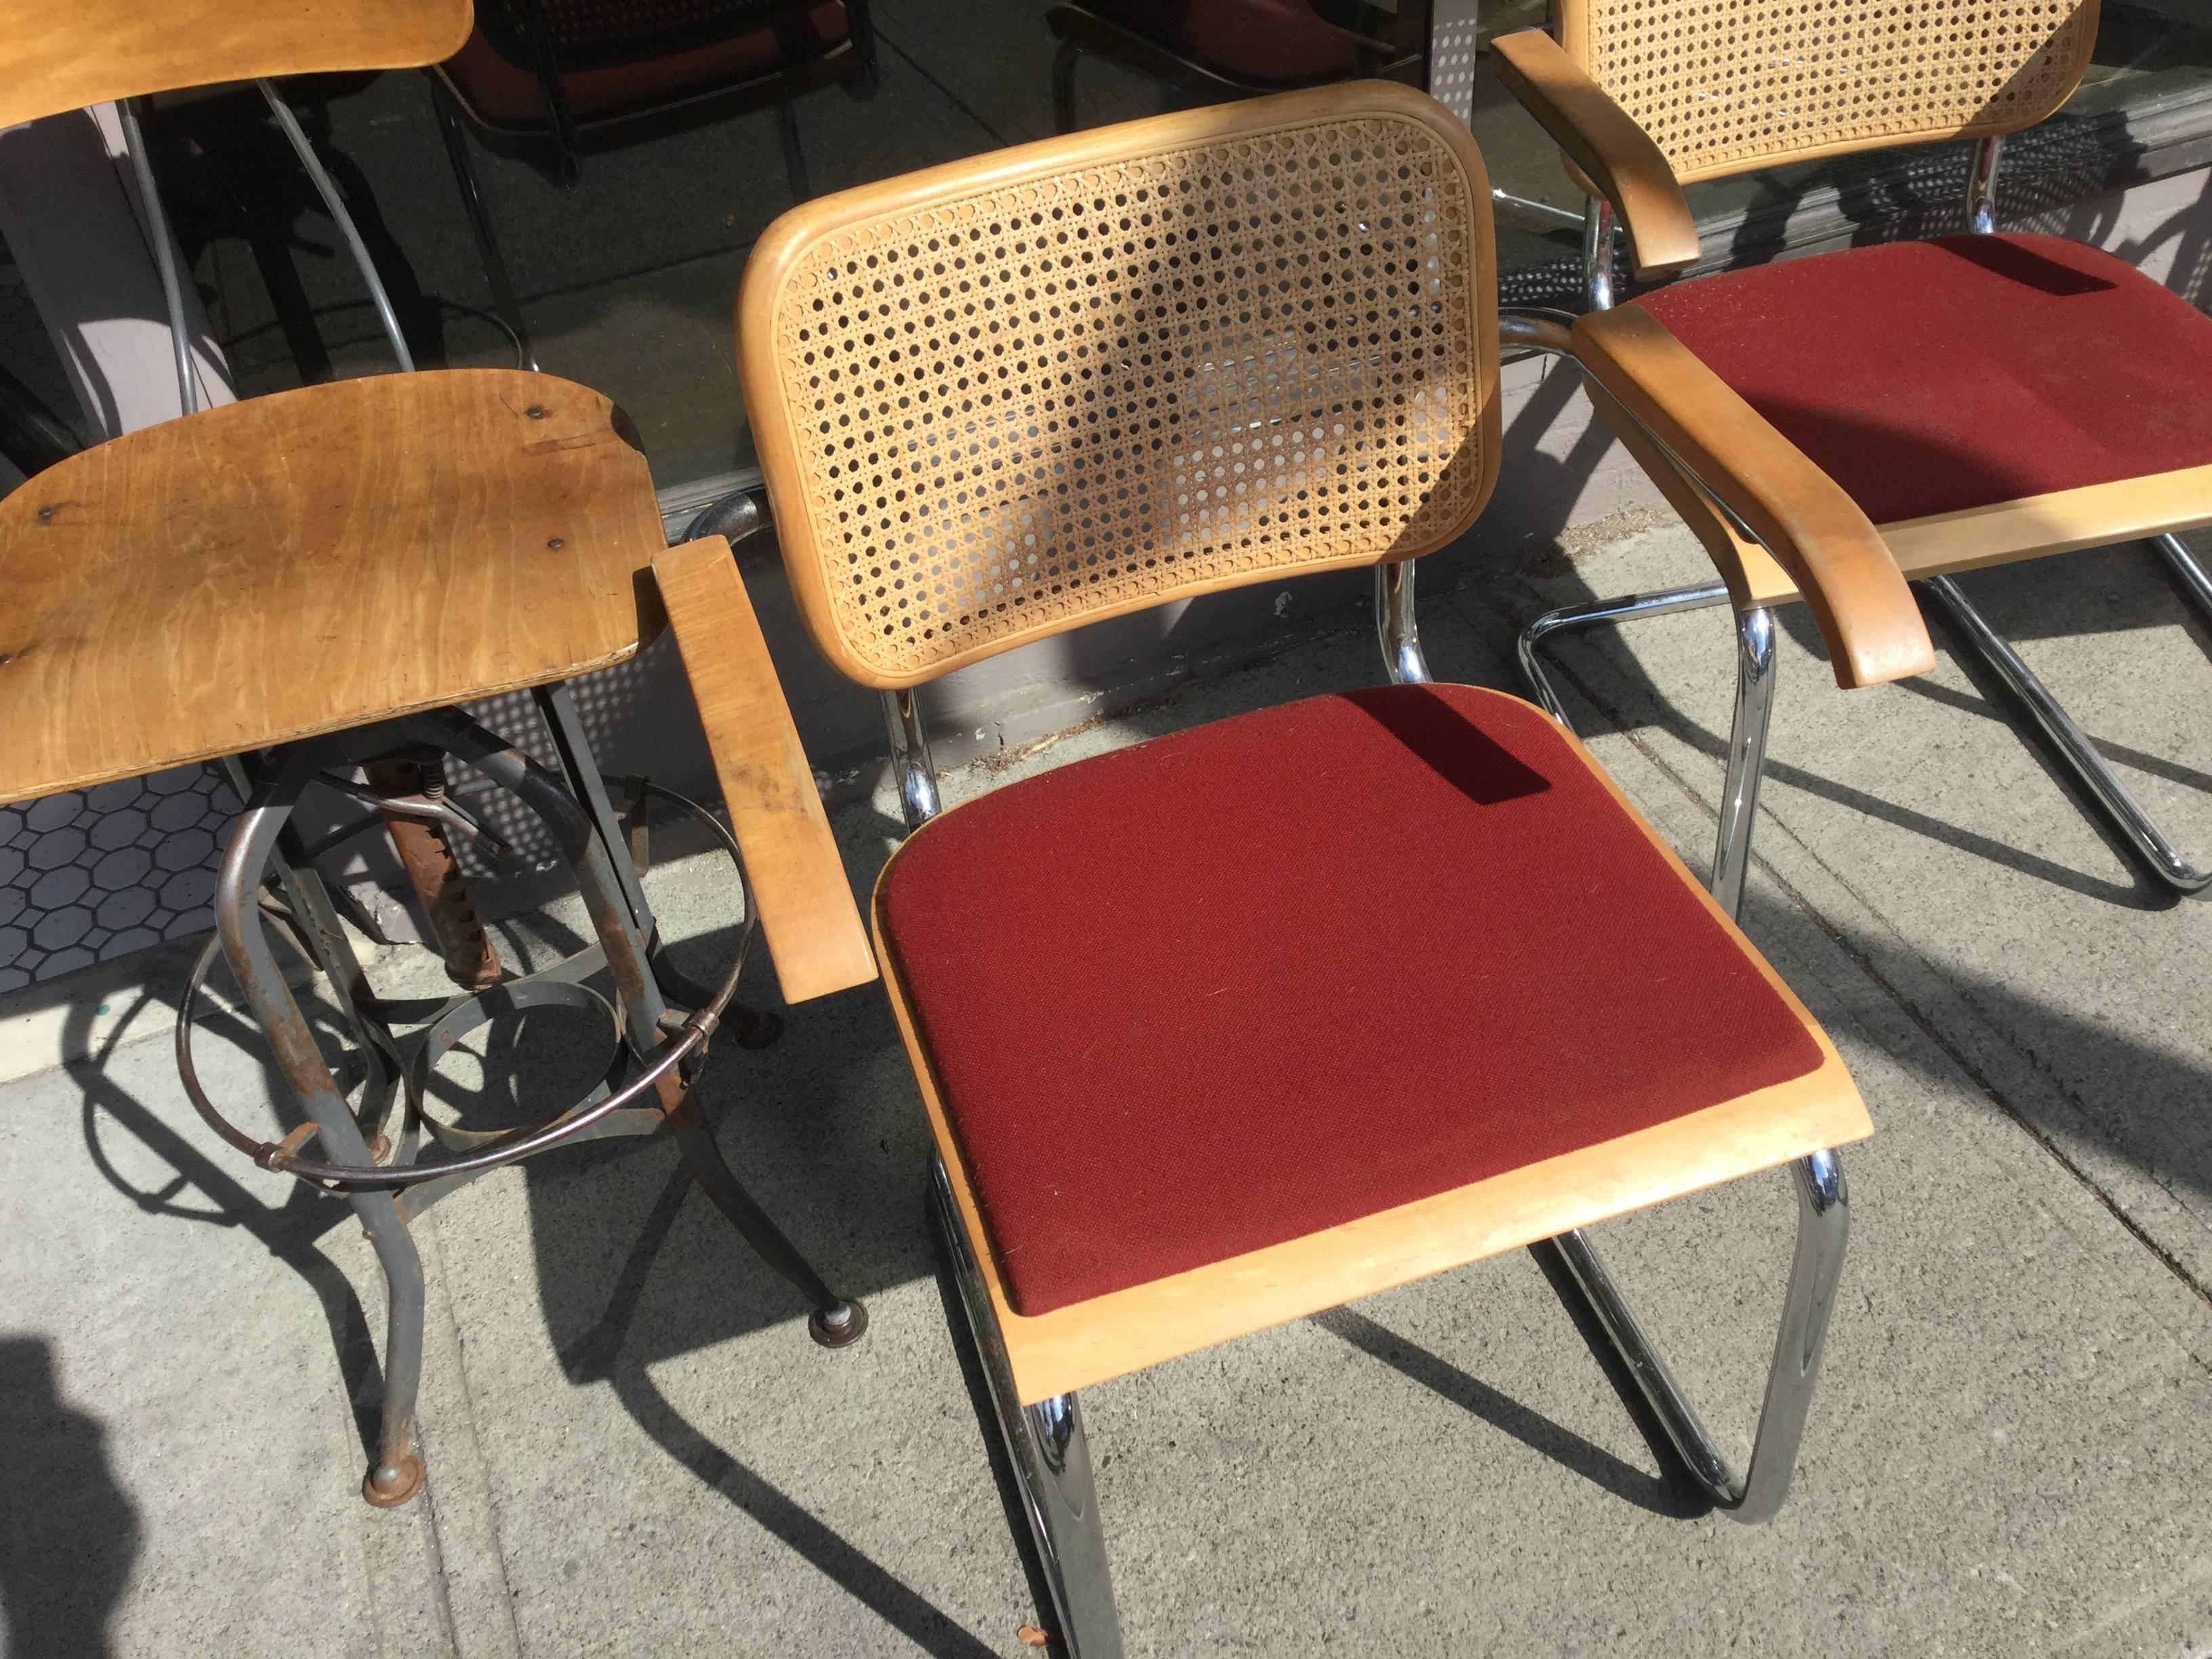 8 Mid Century Modern Marcel Breuer Chairs made by Thonet. All chairs are marked Thonet and red fabric is original.  All chairs have wear. 